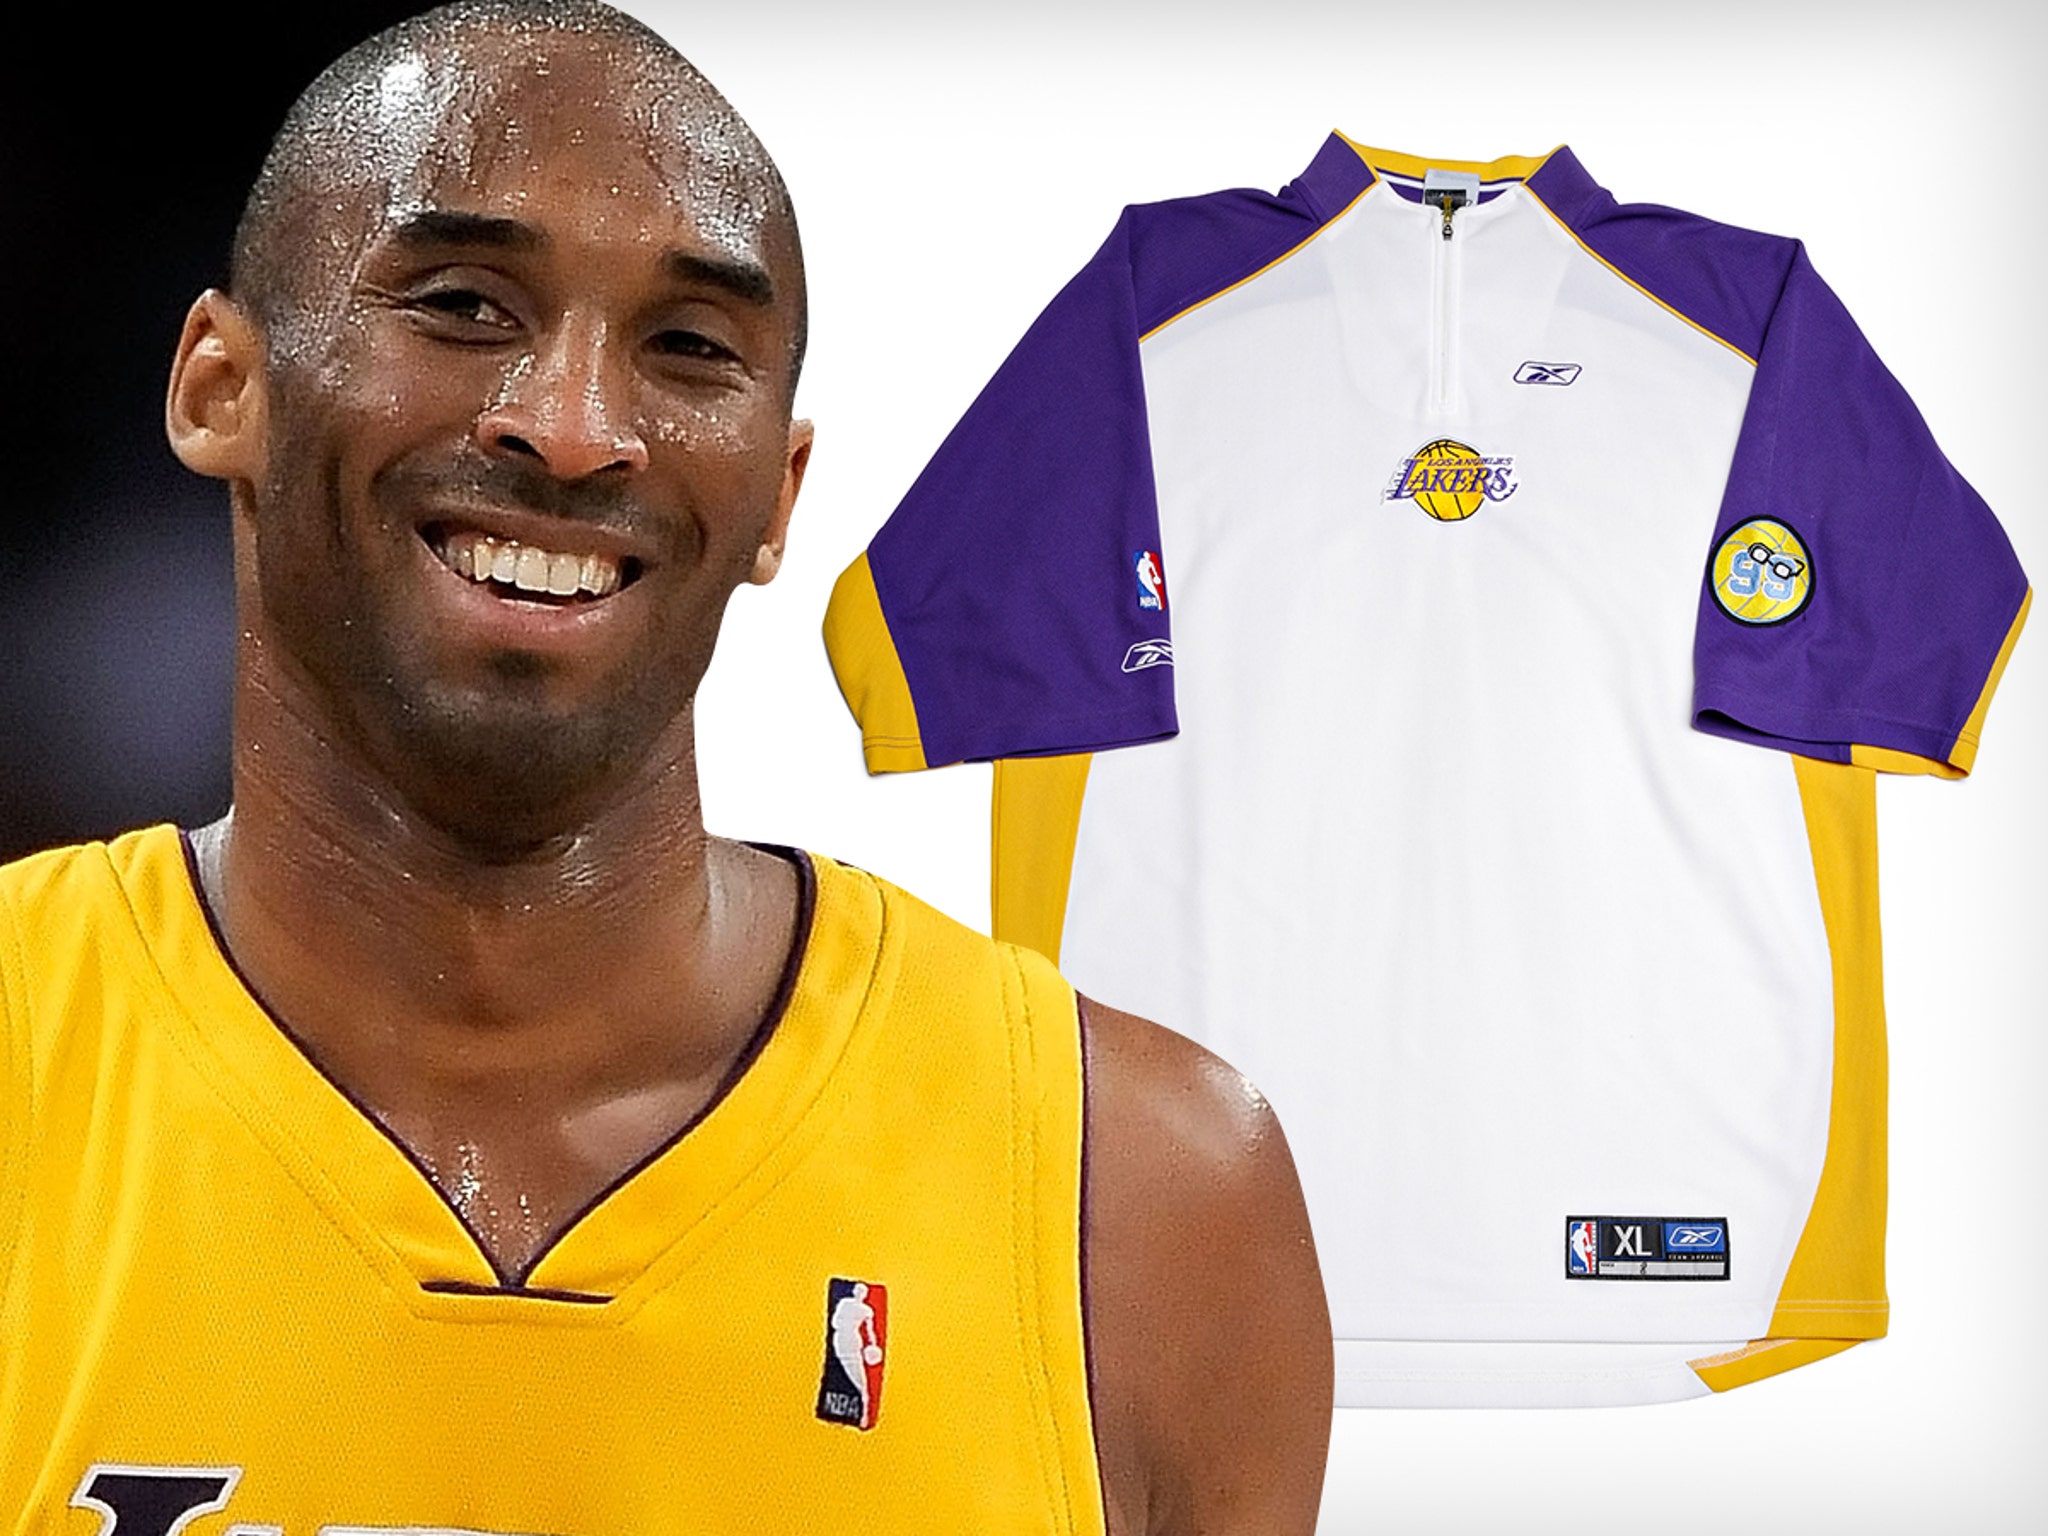 Kobe Bryant's shooting shirt from 81-point game sells for 277,000 dollars -  Eurohoops